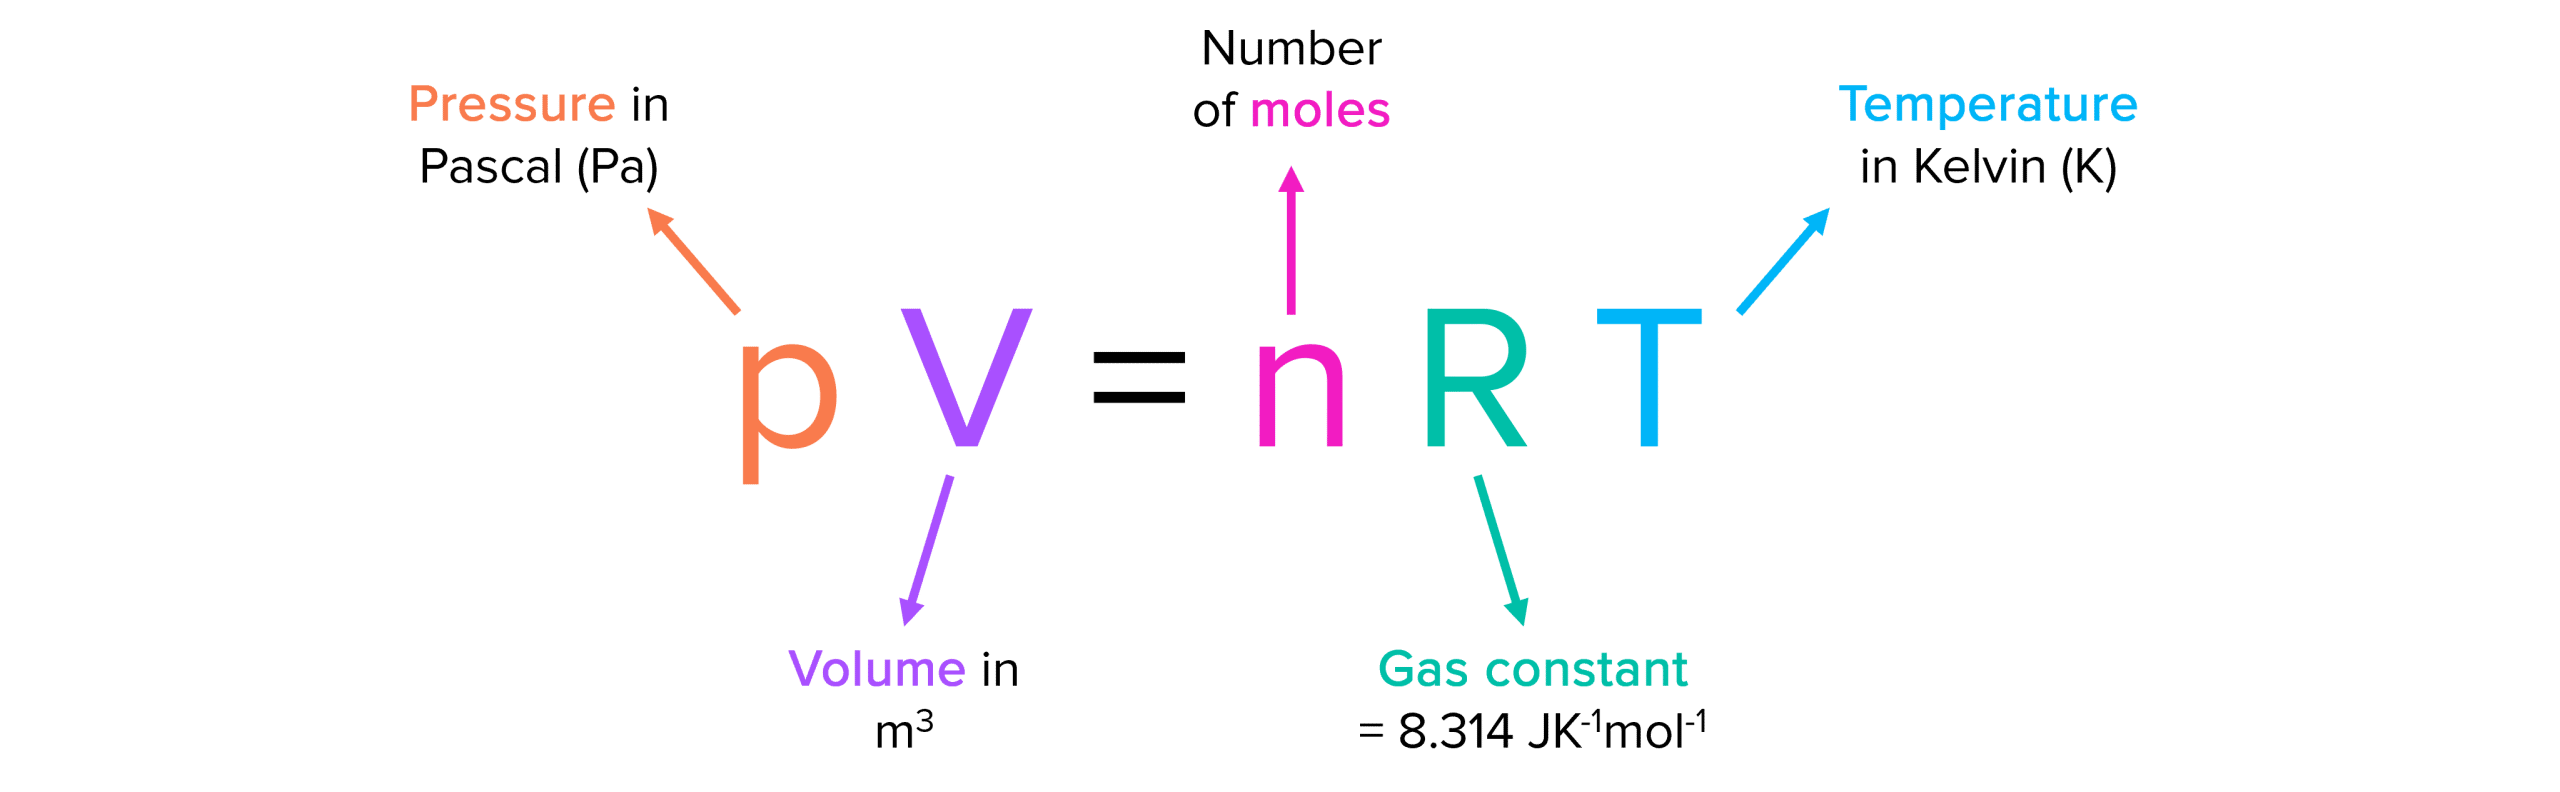 The Ideal Gas Equation